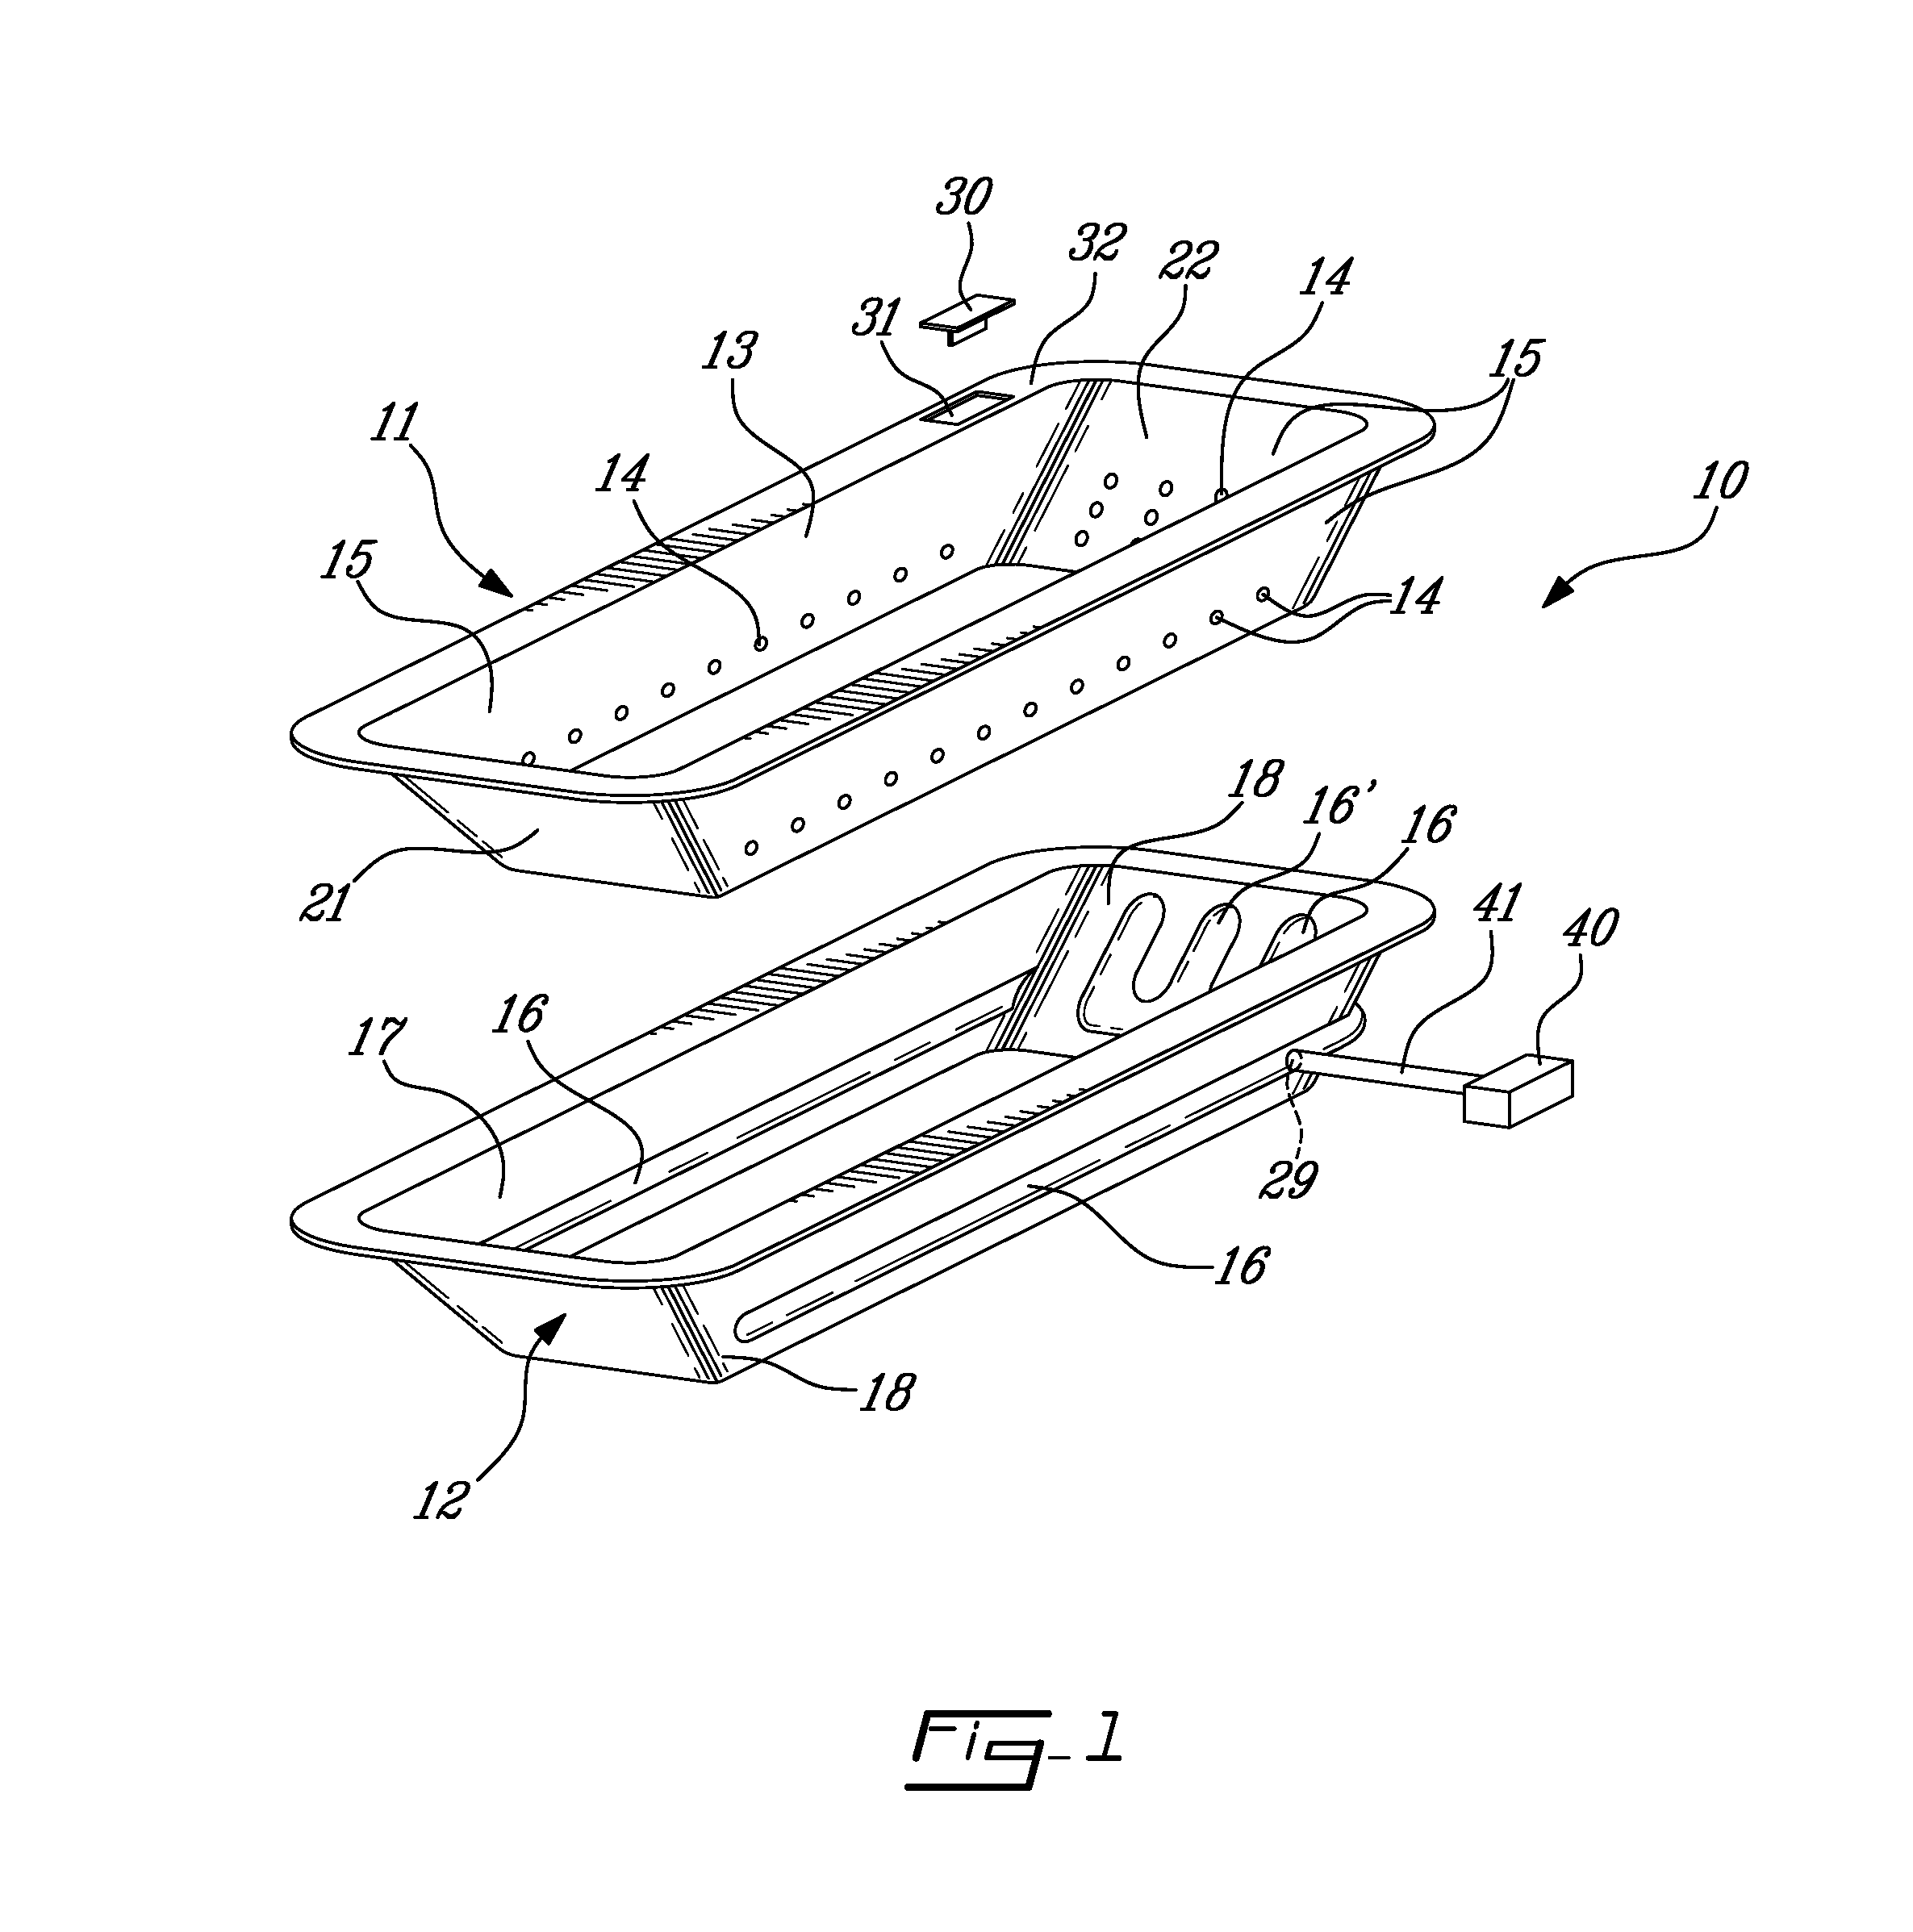 Bathtub formed of interconnected shells and method of delivering bathtubs